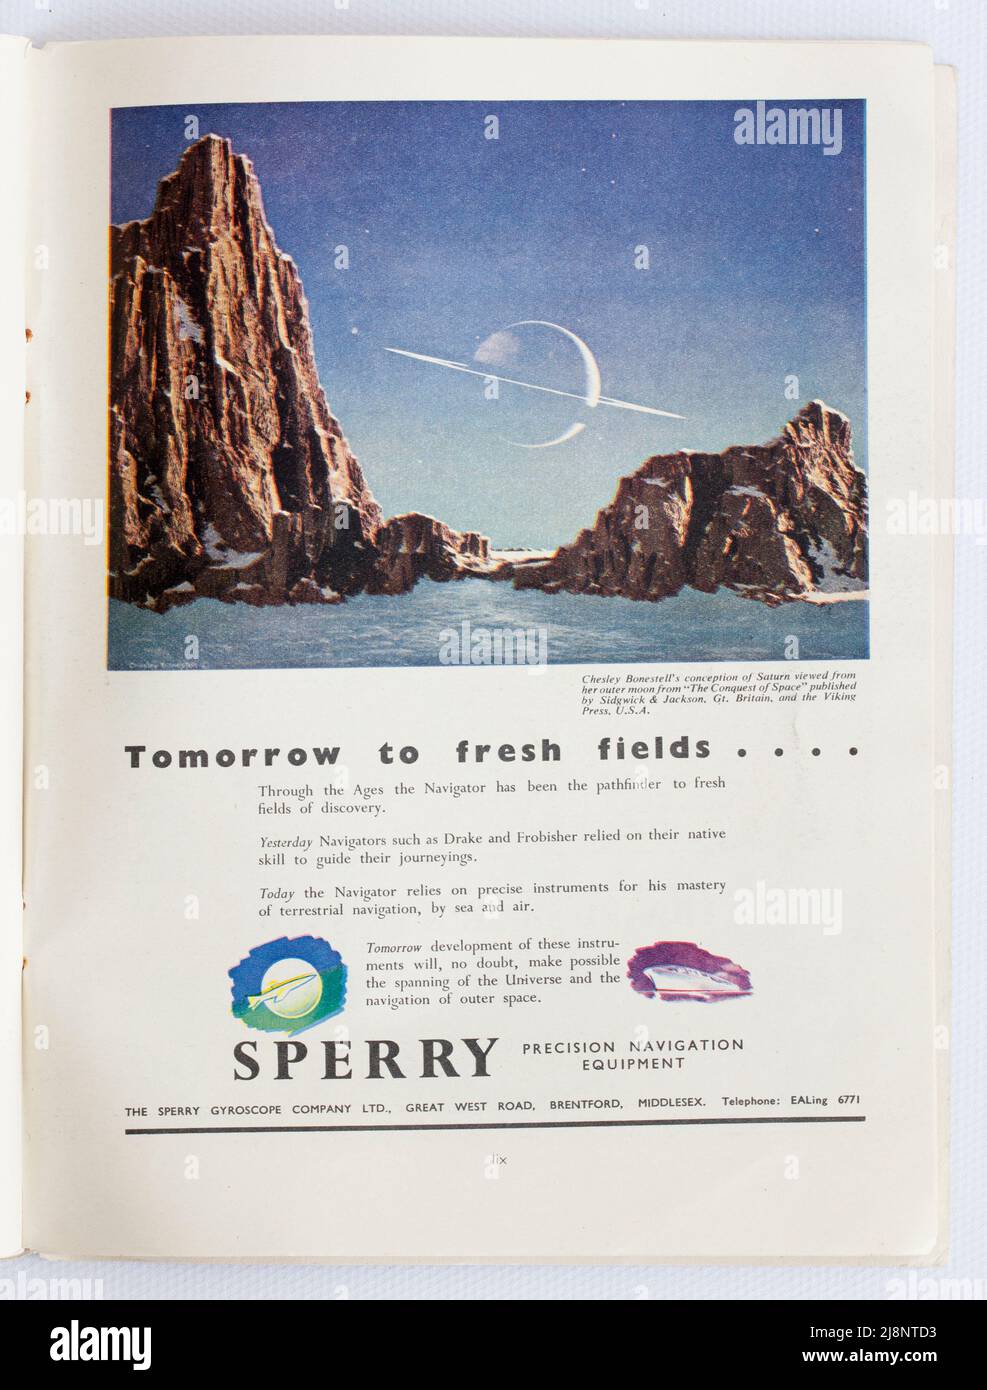 Old 1950s British Advertising for the Sperry Gyroscope Company - Precision Navigation Equipment Foto Stock